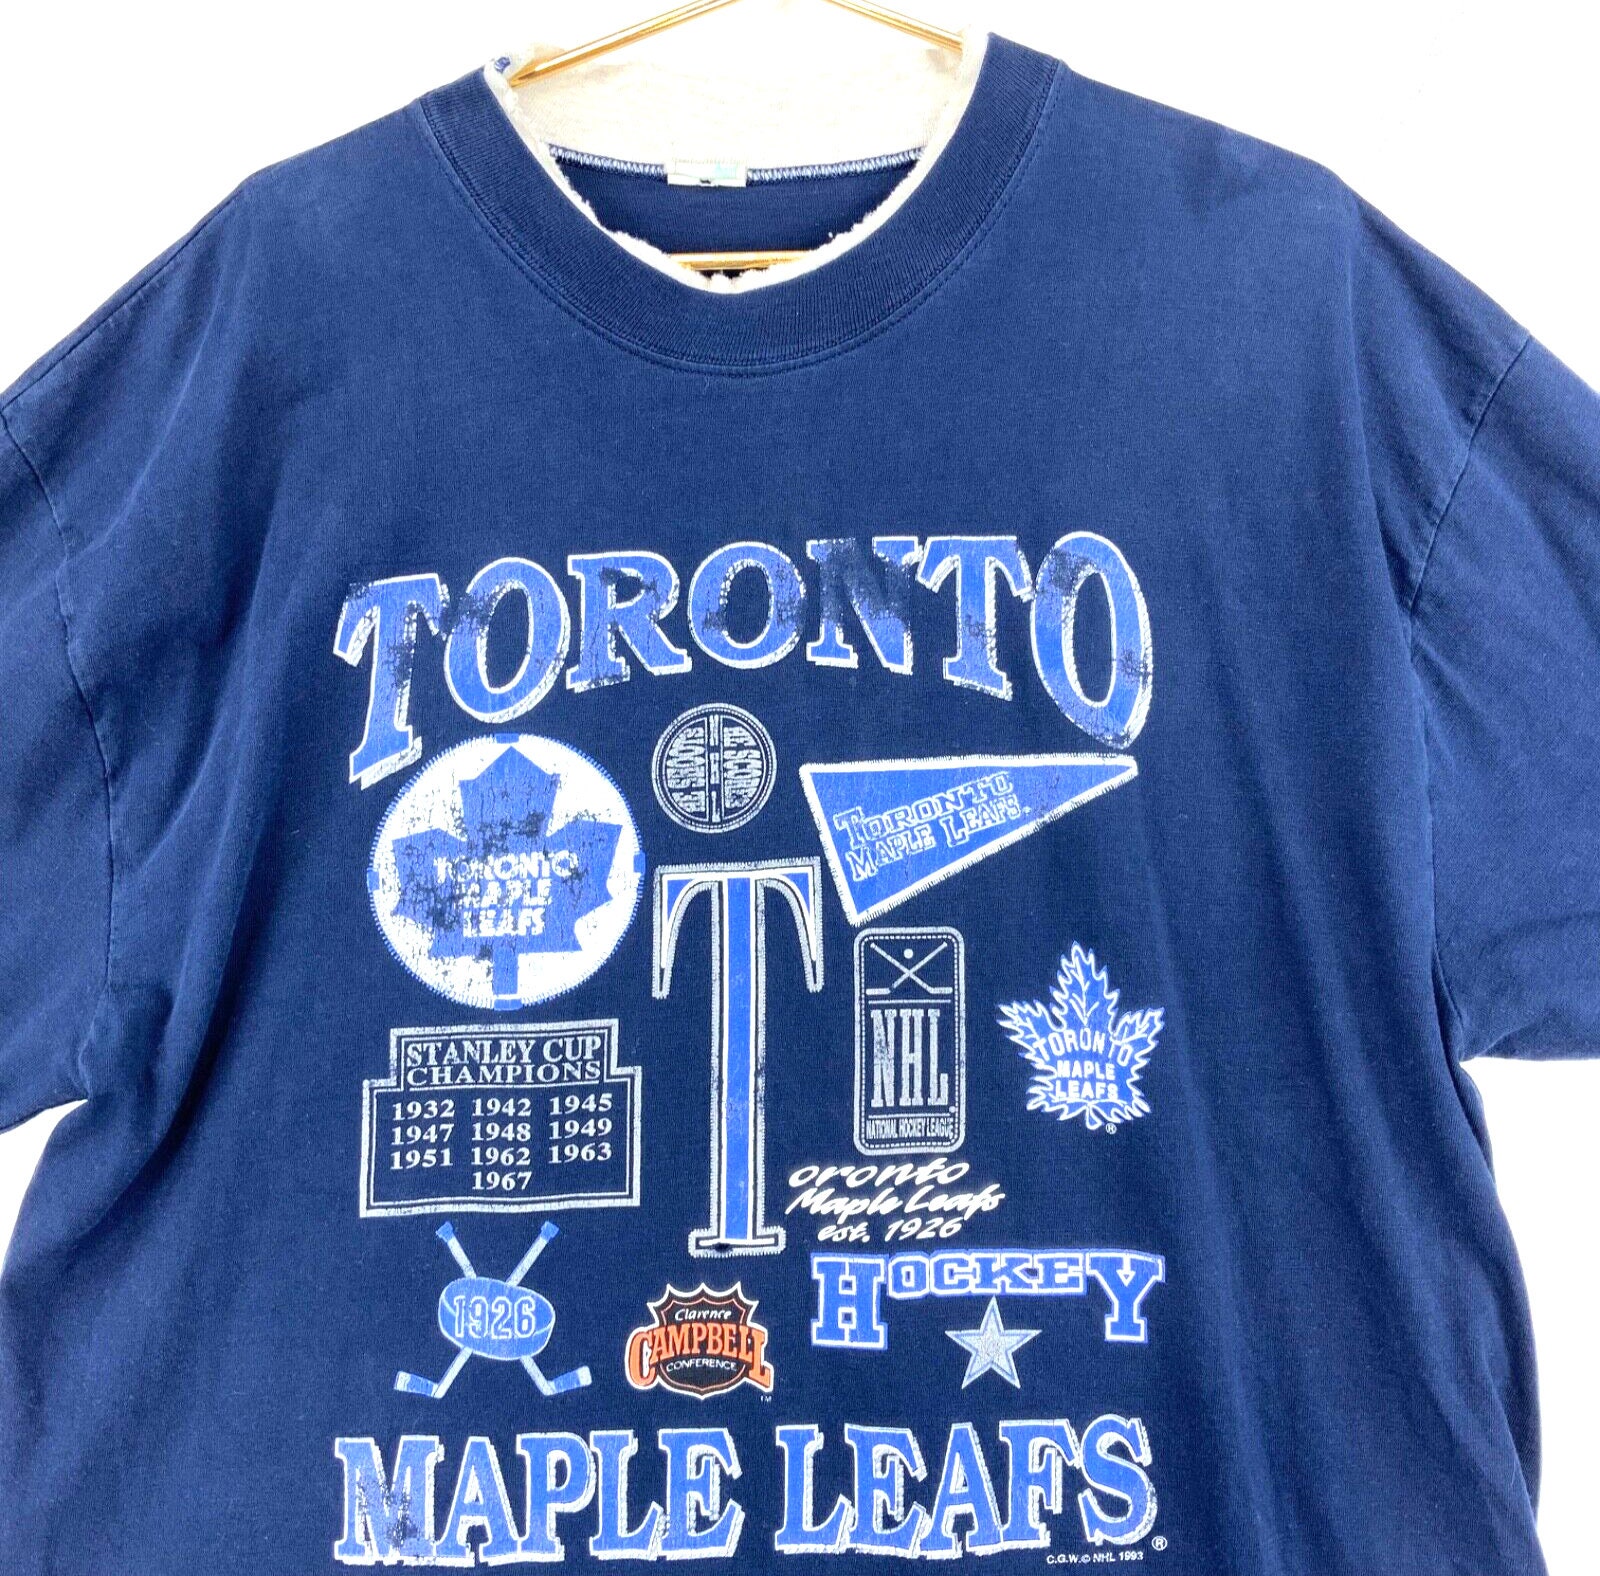 Vintage Style The Passion Toronto Maple Leafs Unisex T-Shirt